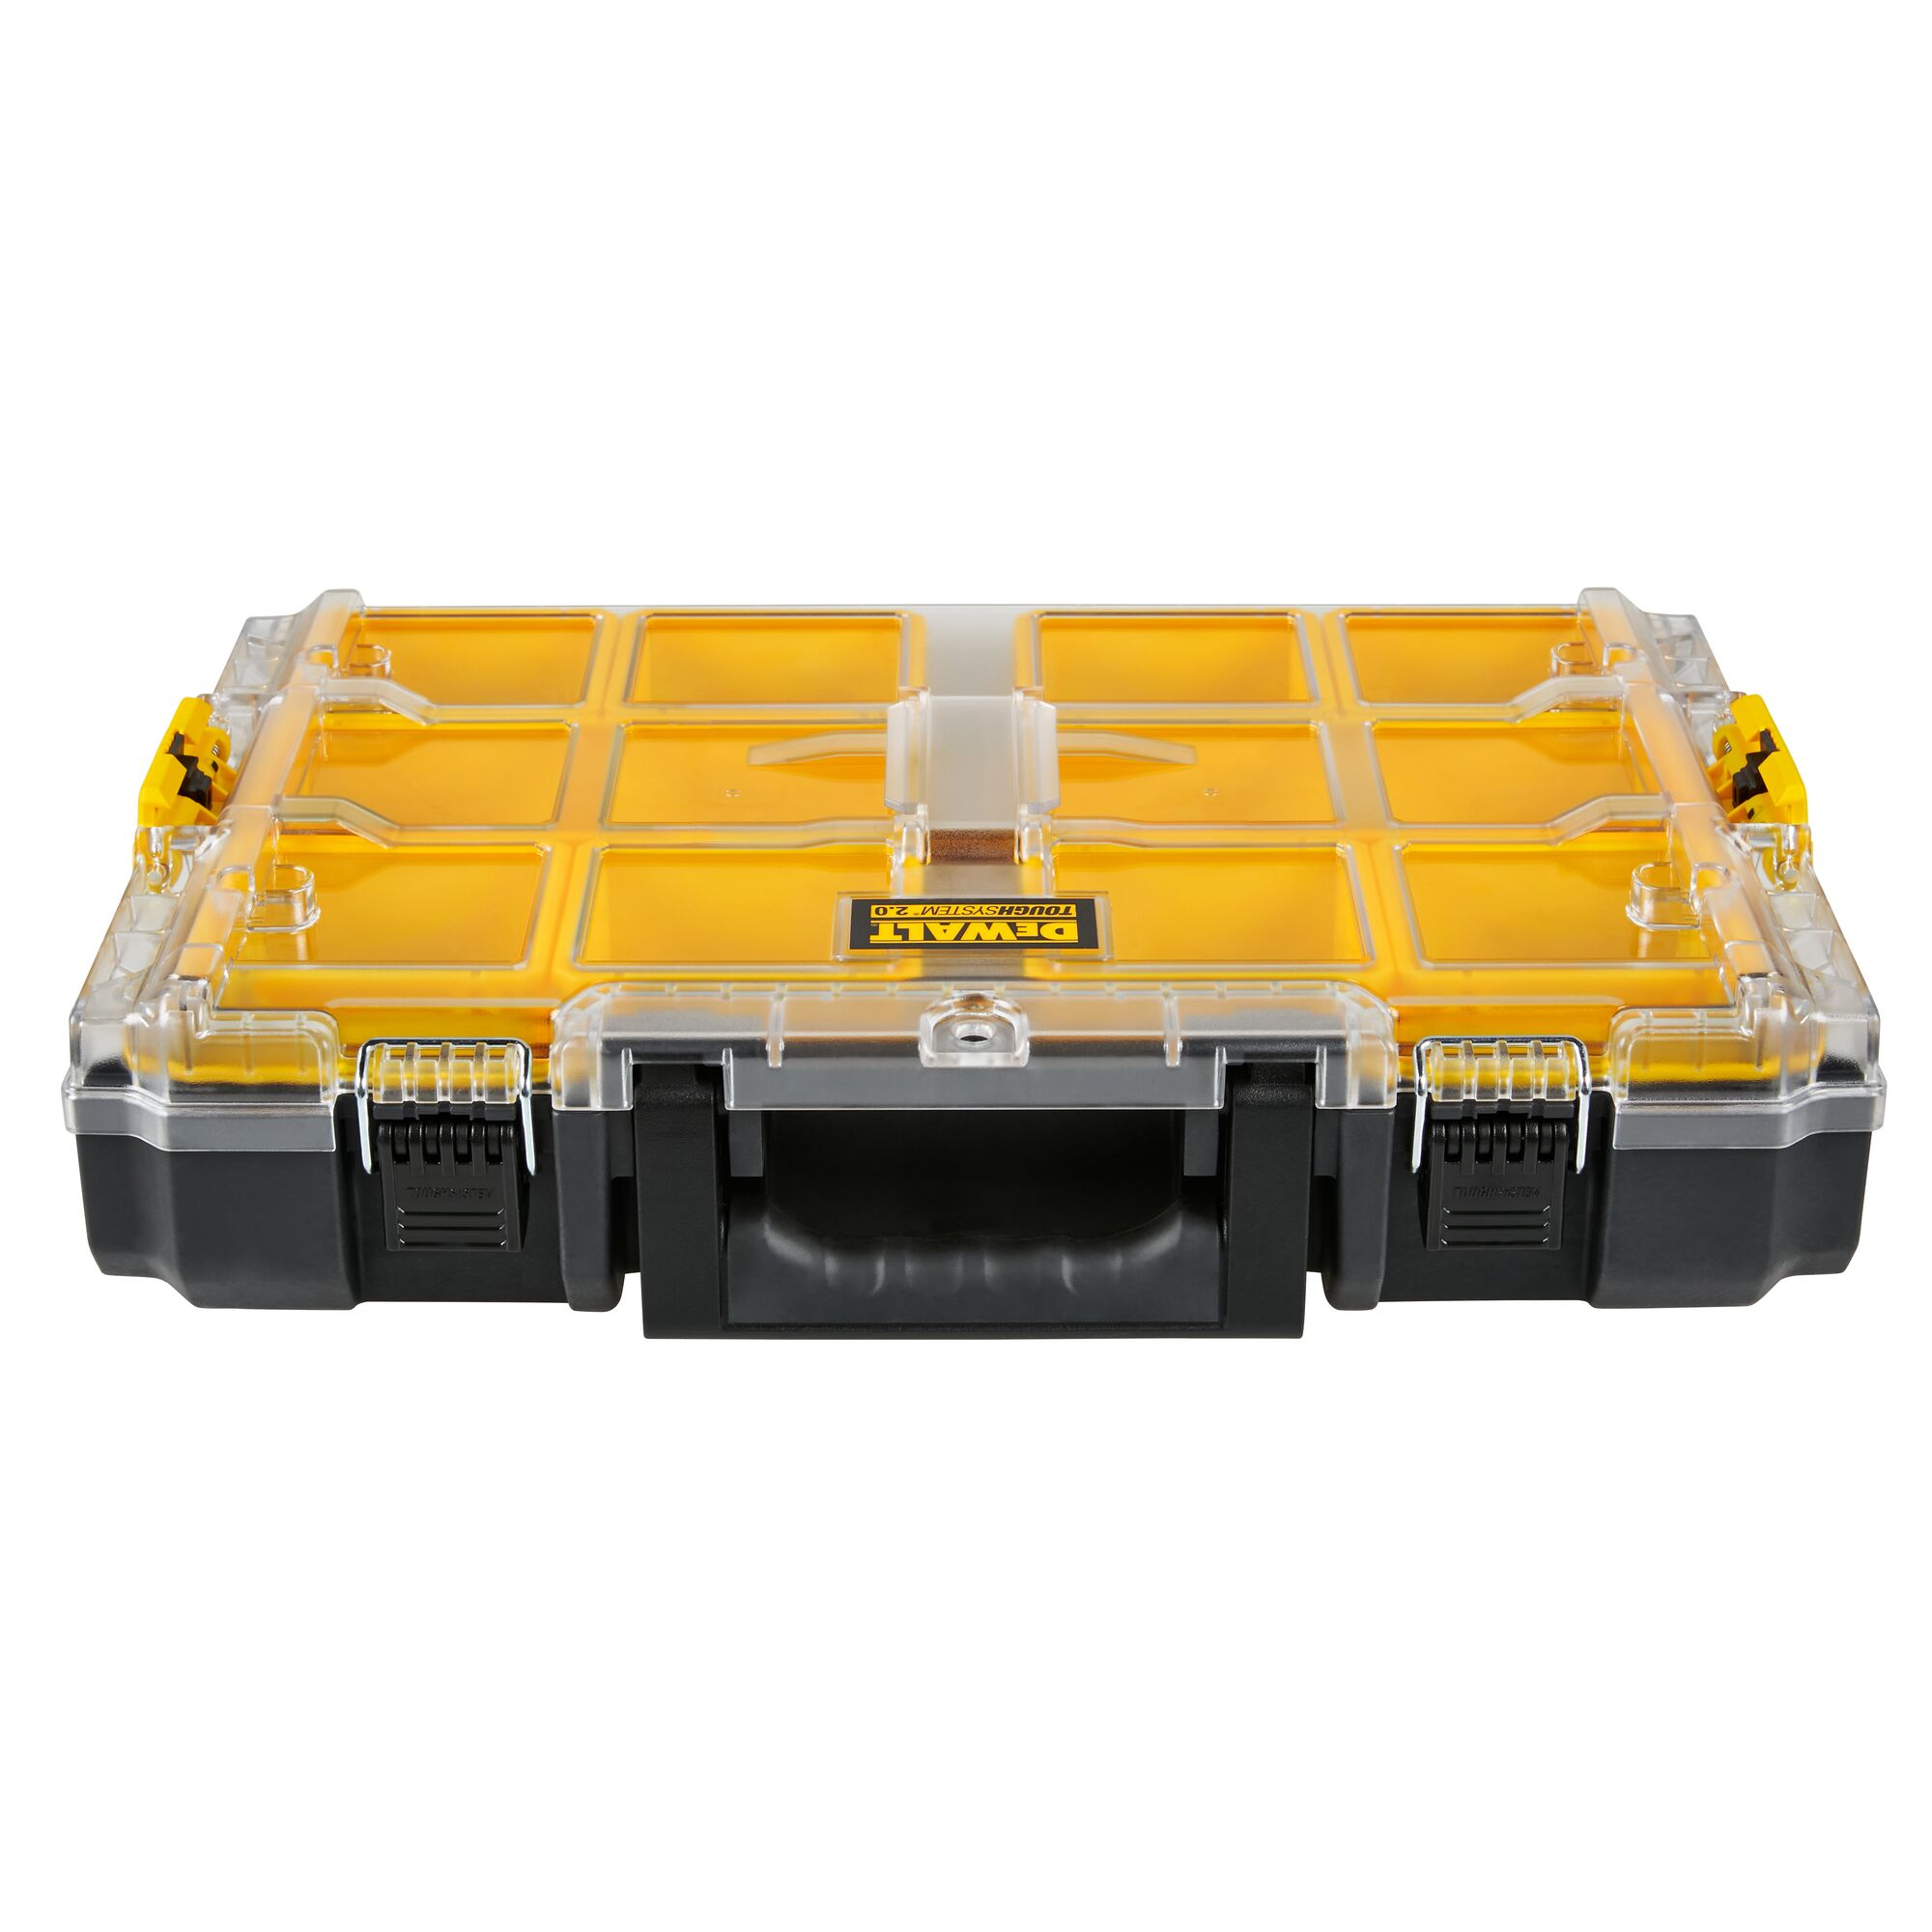 DEWALT - The ToughSystem® 2.0 Deep Tool Tray is designed to endure whatever  the jobsite throws at it (or in it).